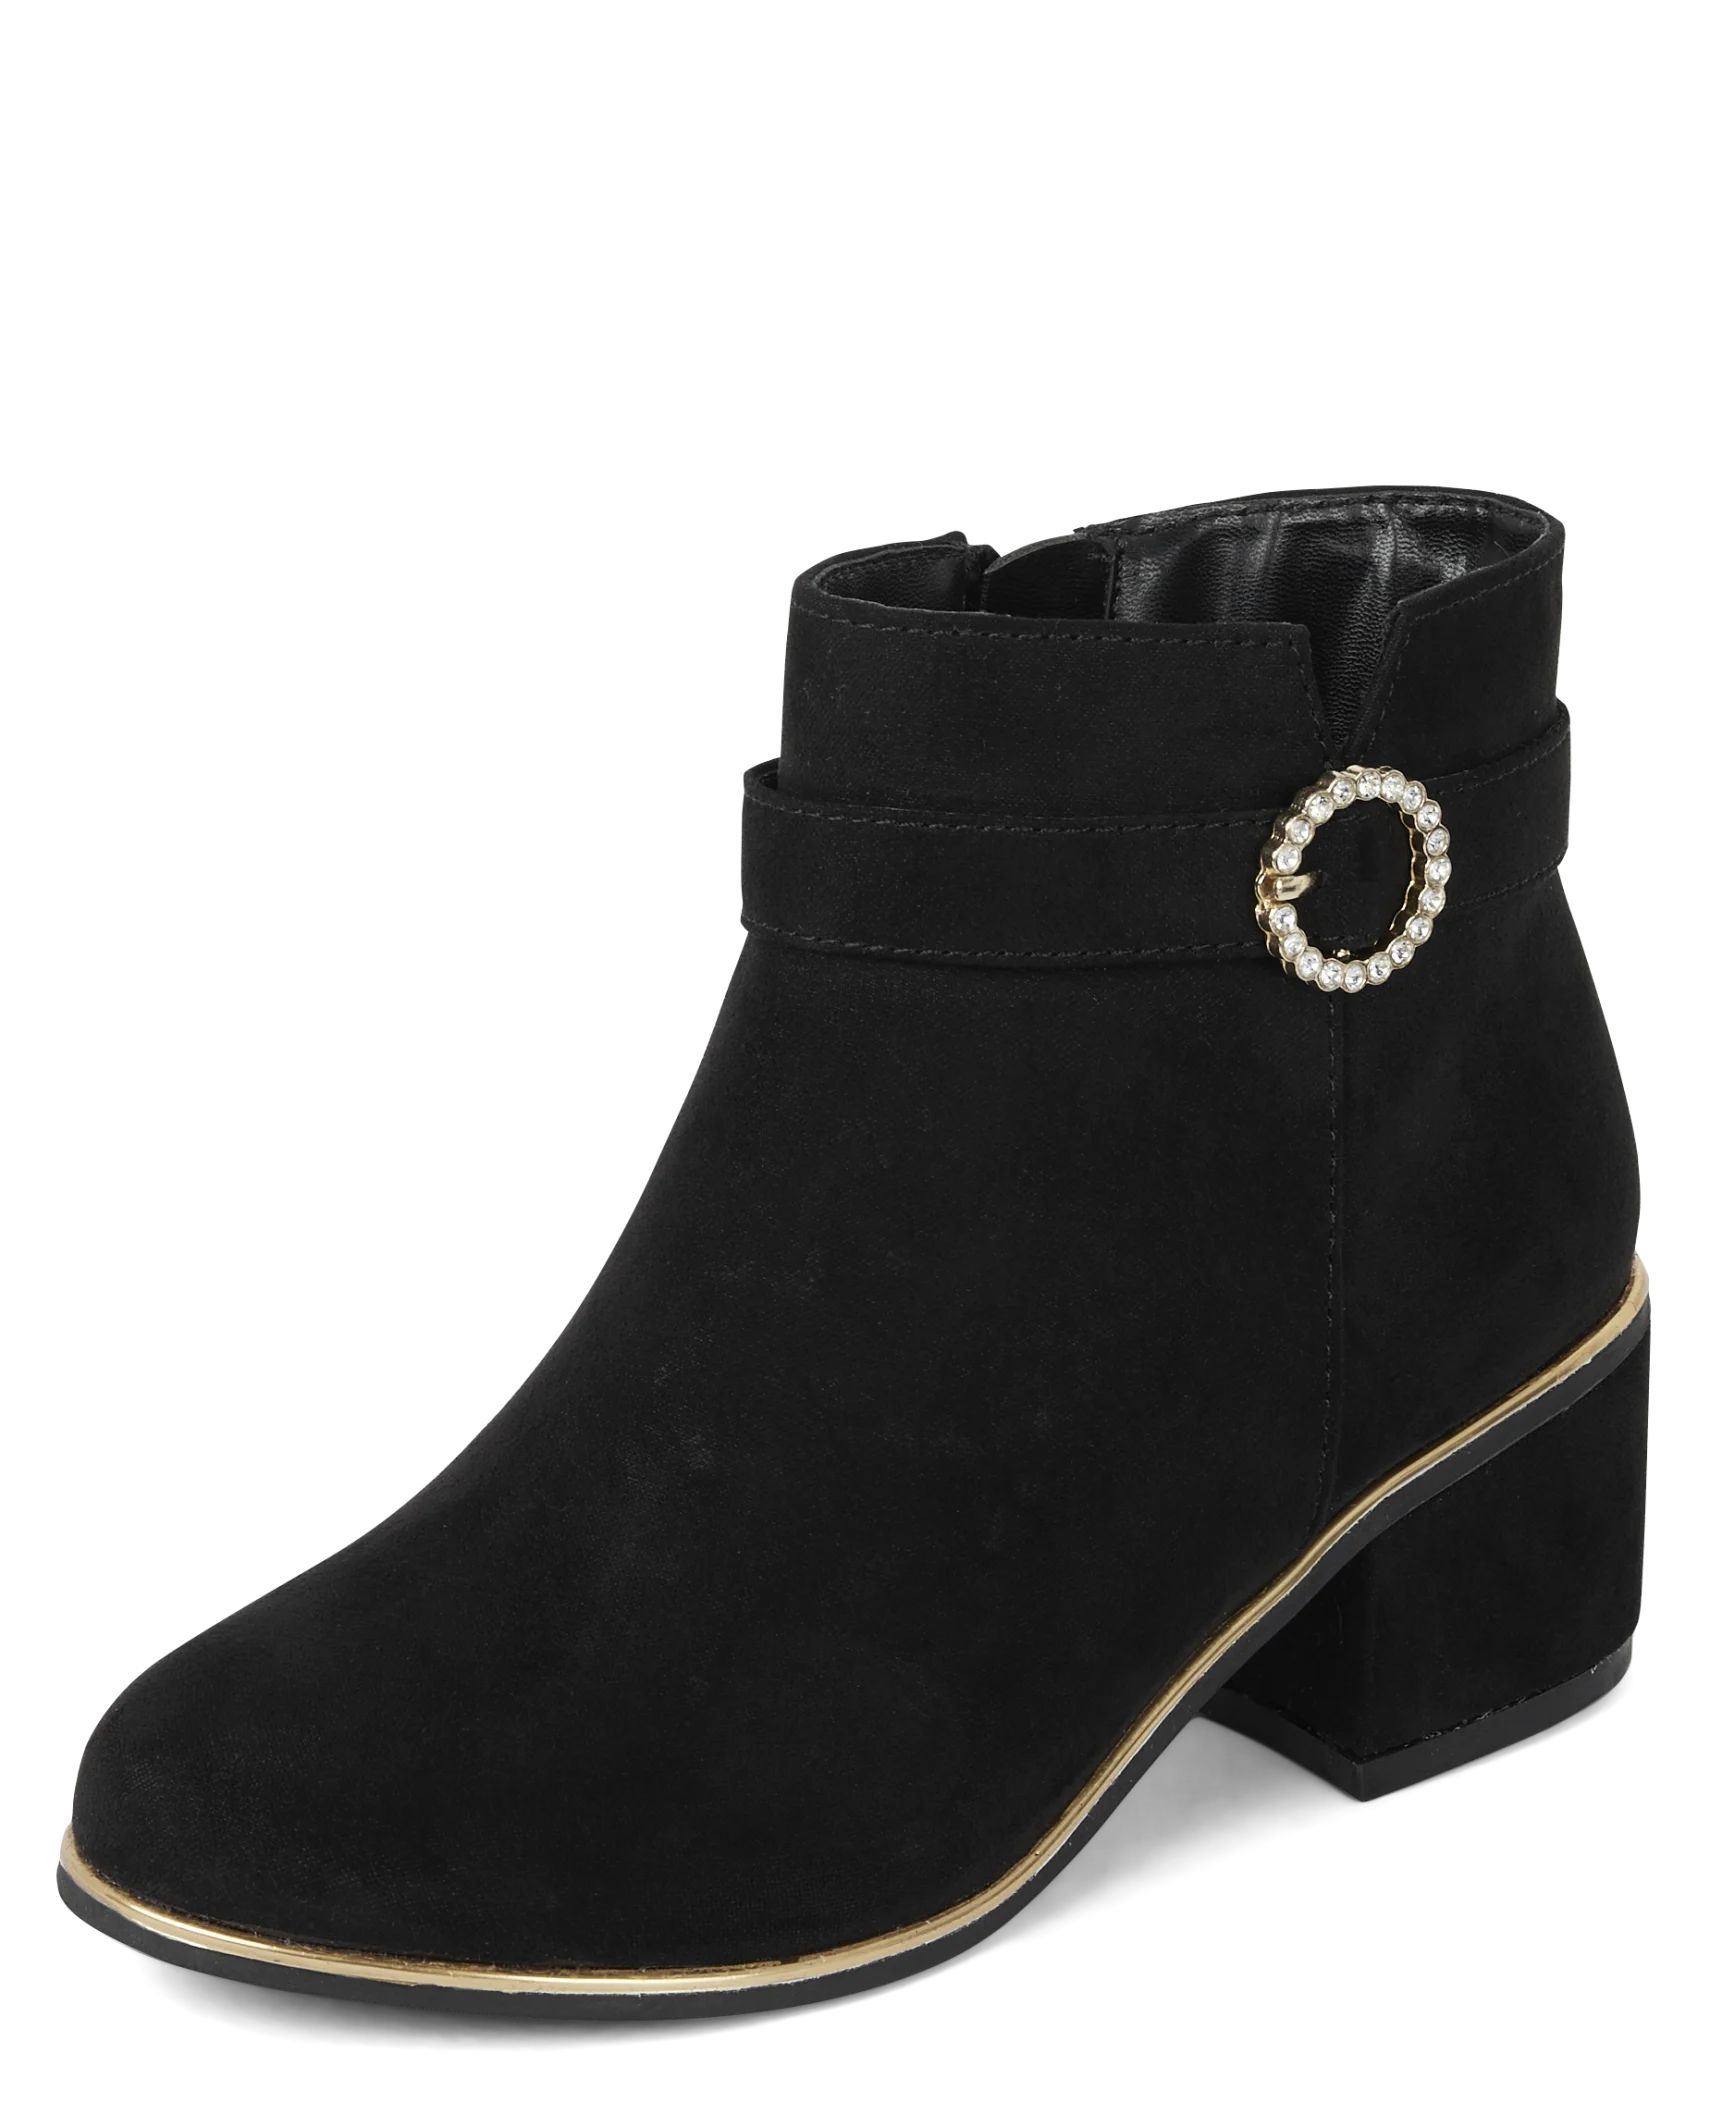 Girls Jeweled Buckle Faux Suede Heel Booties - black | The Children's Place